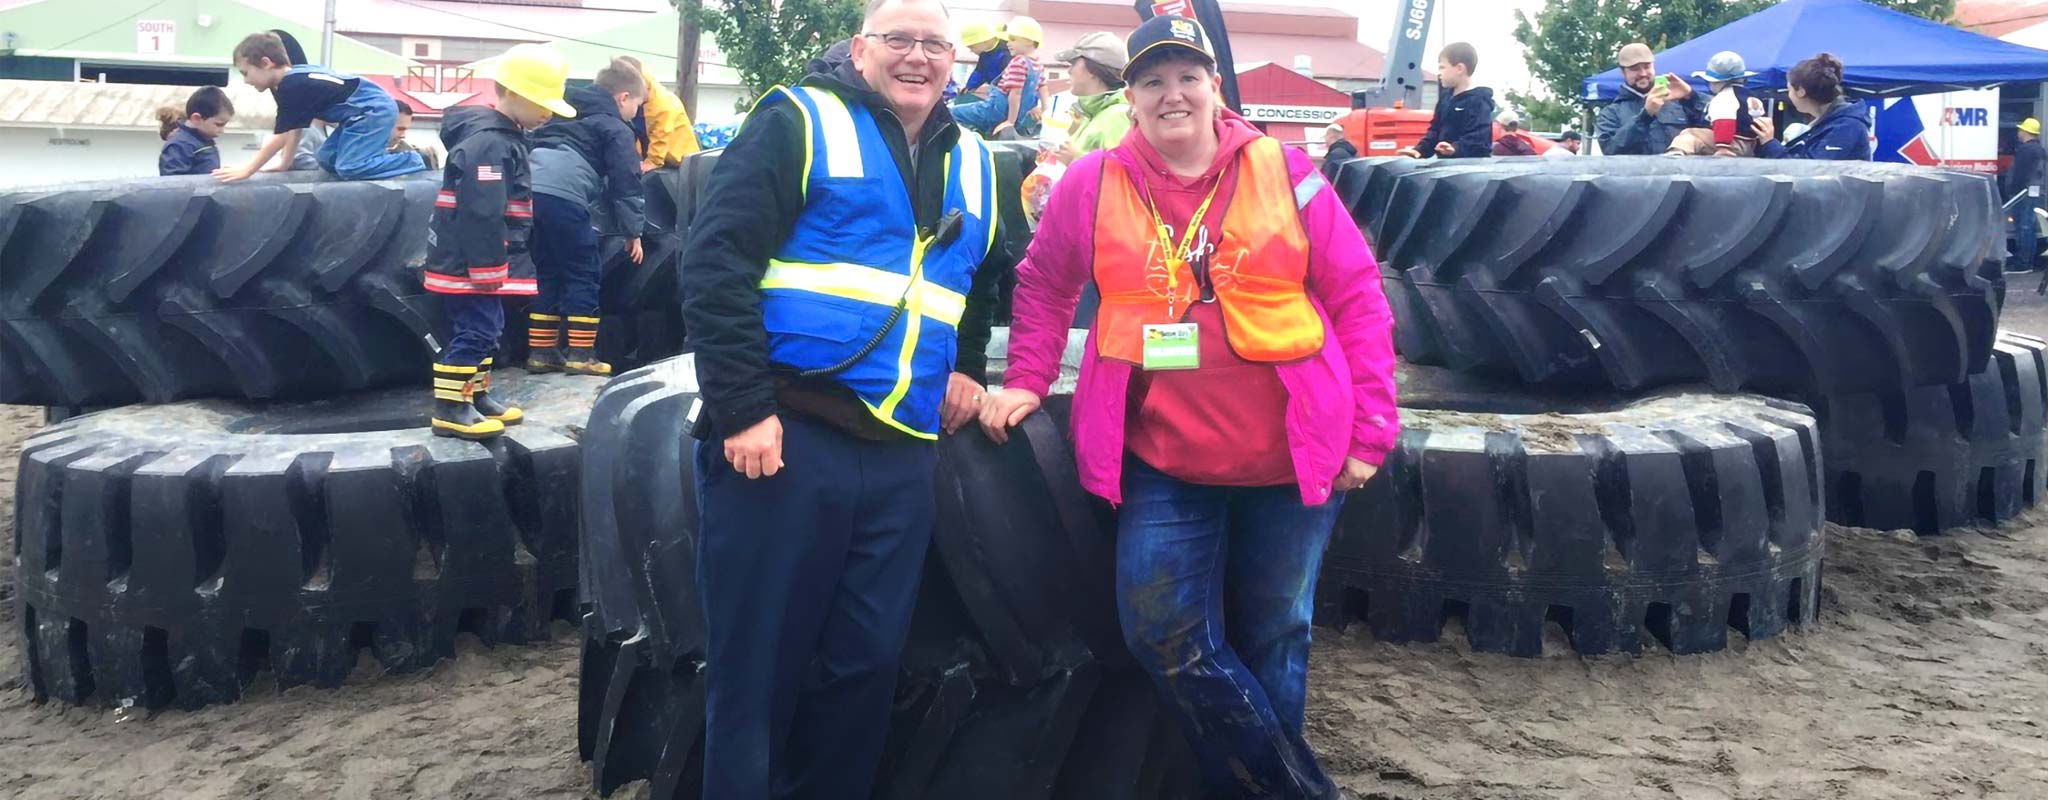 Woodland Les Schwab manager Brien Rose and his wife supervising children playing on giant tires at Dozer Day in Vancouver.